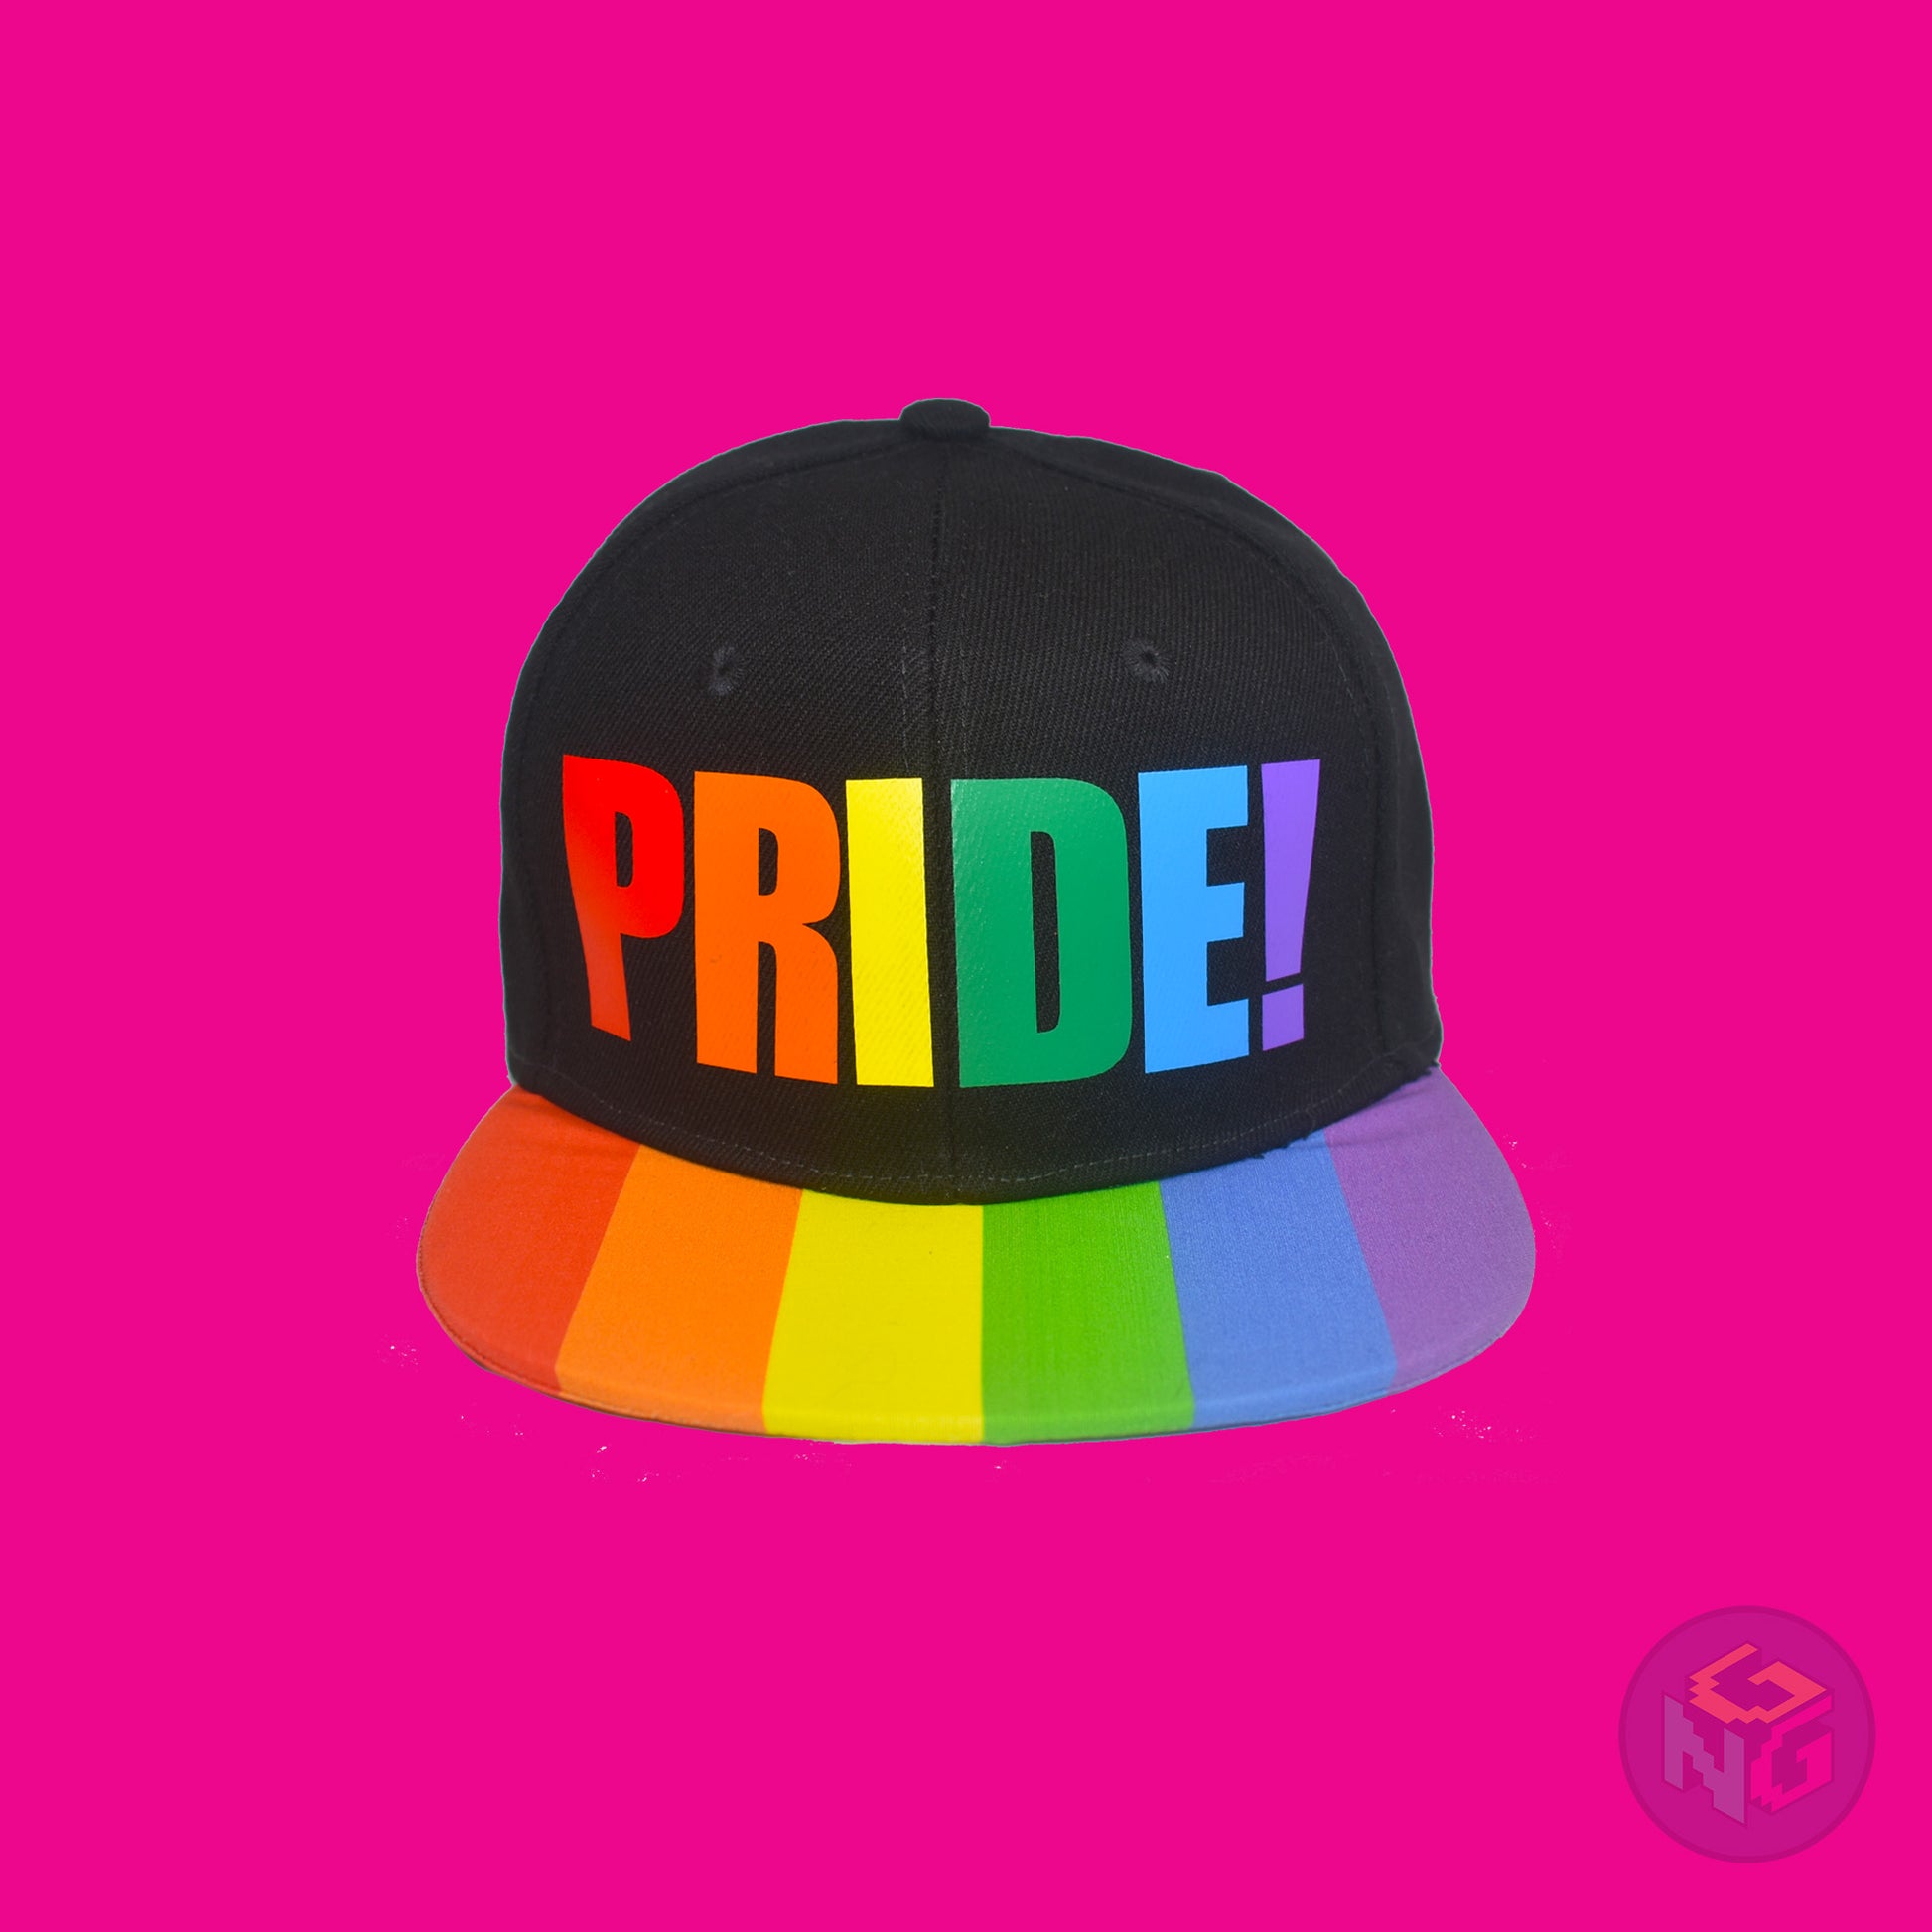 Black flat bill snapback hat. The brim has the rainbow pride flag on both sides and the front of the hat has the word “PRIDE!” in rainbow letters. Front view